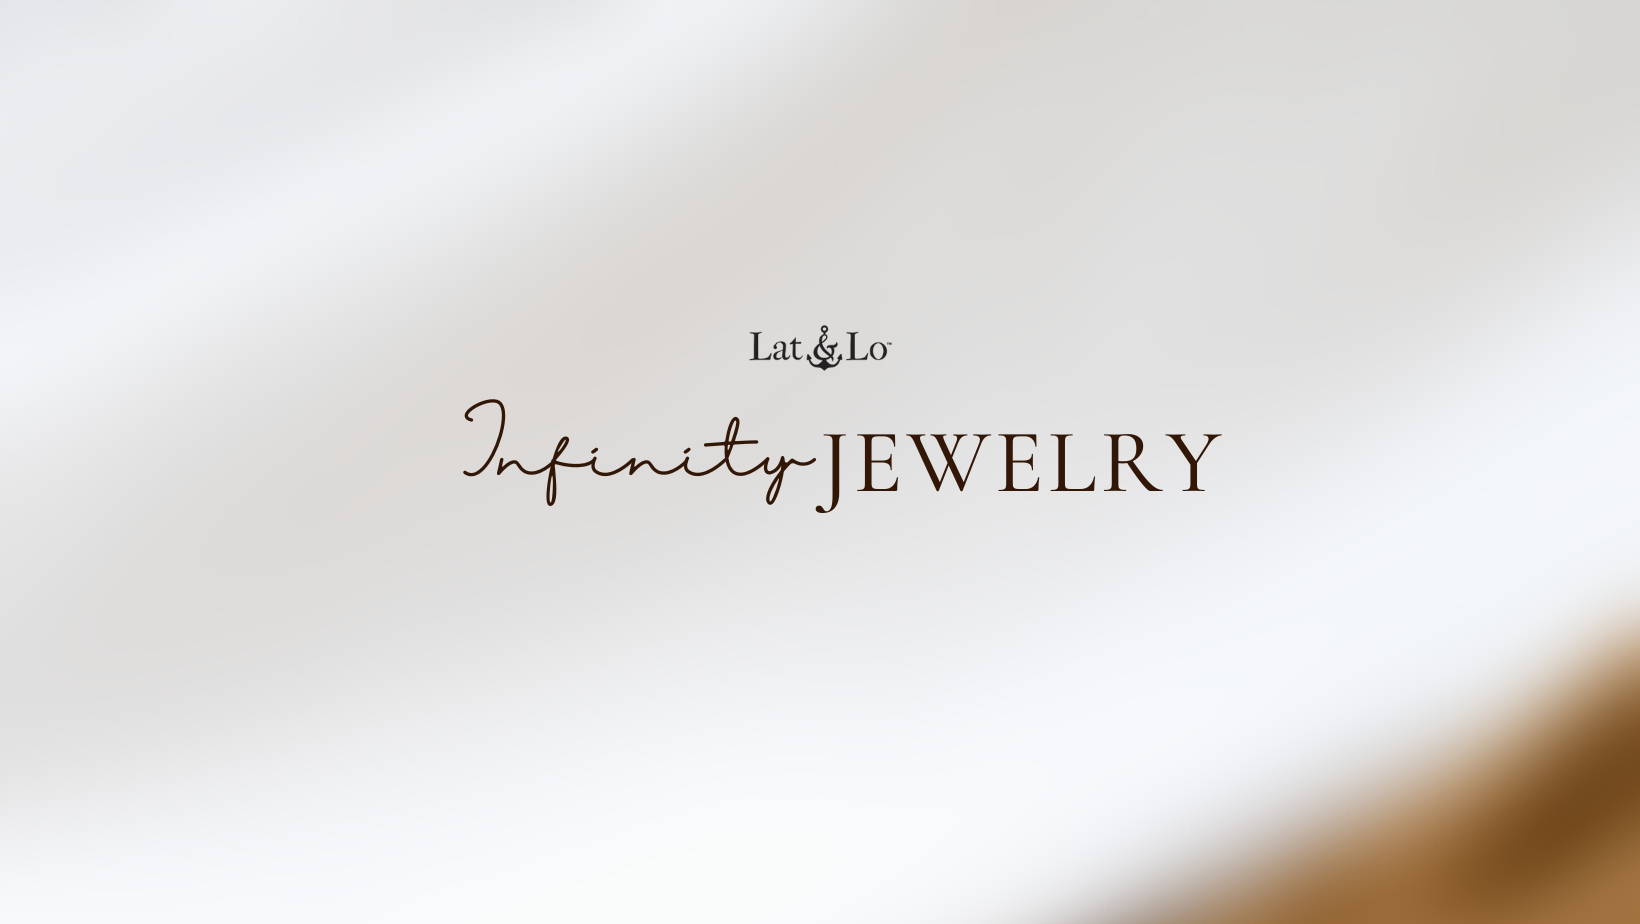 infinity permanent jewelry booking page by lat & lo